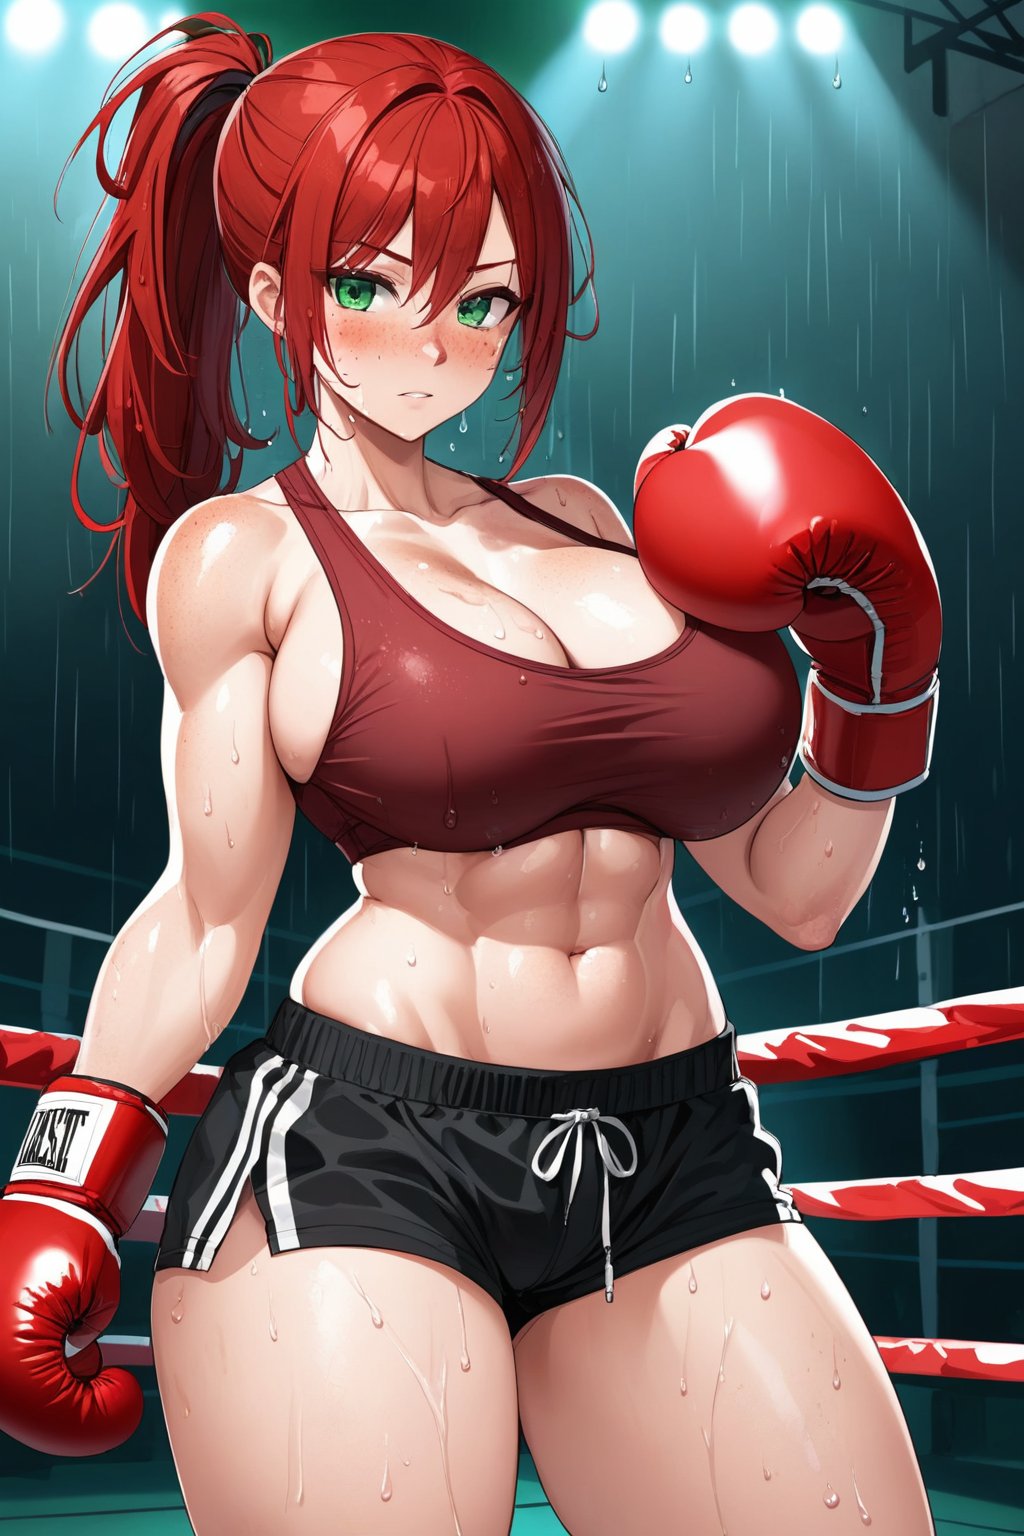 messy hair, red hair, green eyes, freckles, thick thighs, abs, large breasts, bare breasts, nipples, red boxing gloves, boxing ring background, sweat, ponytail, wet, shorts